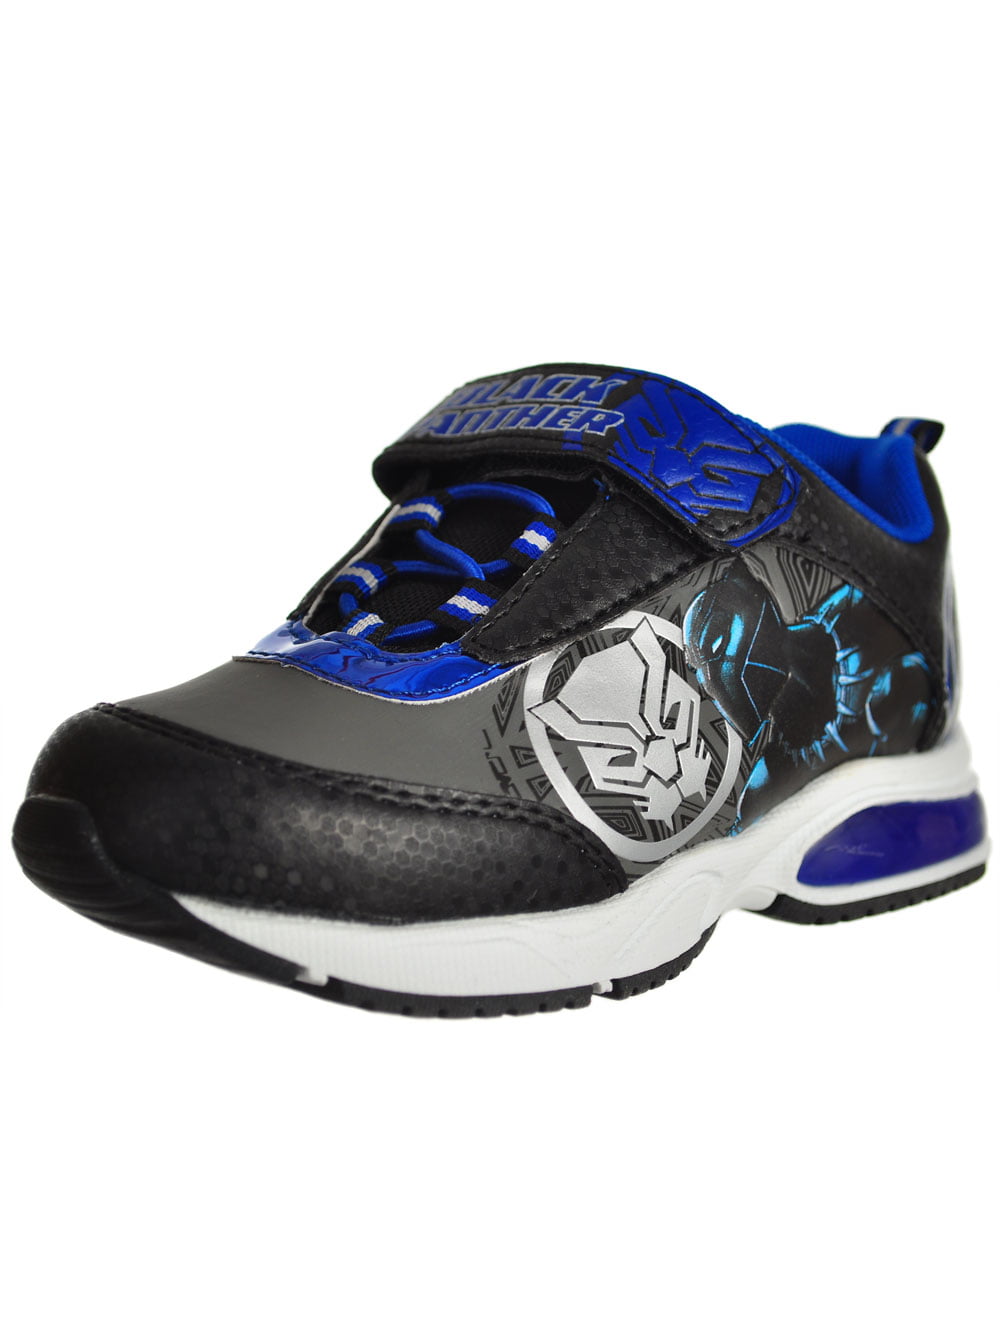 BLACK PANTHER ACTIVE ATHLETIC LIGHTED 